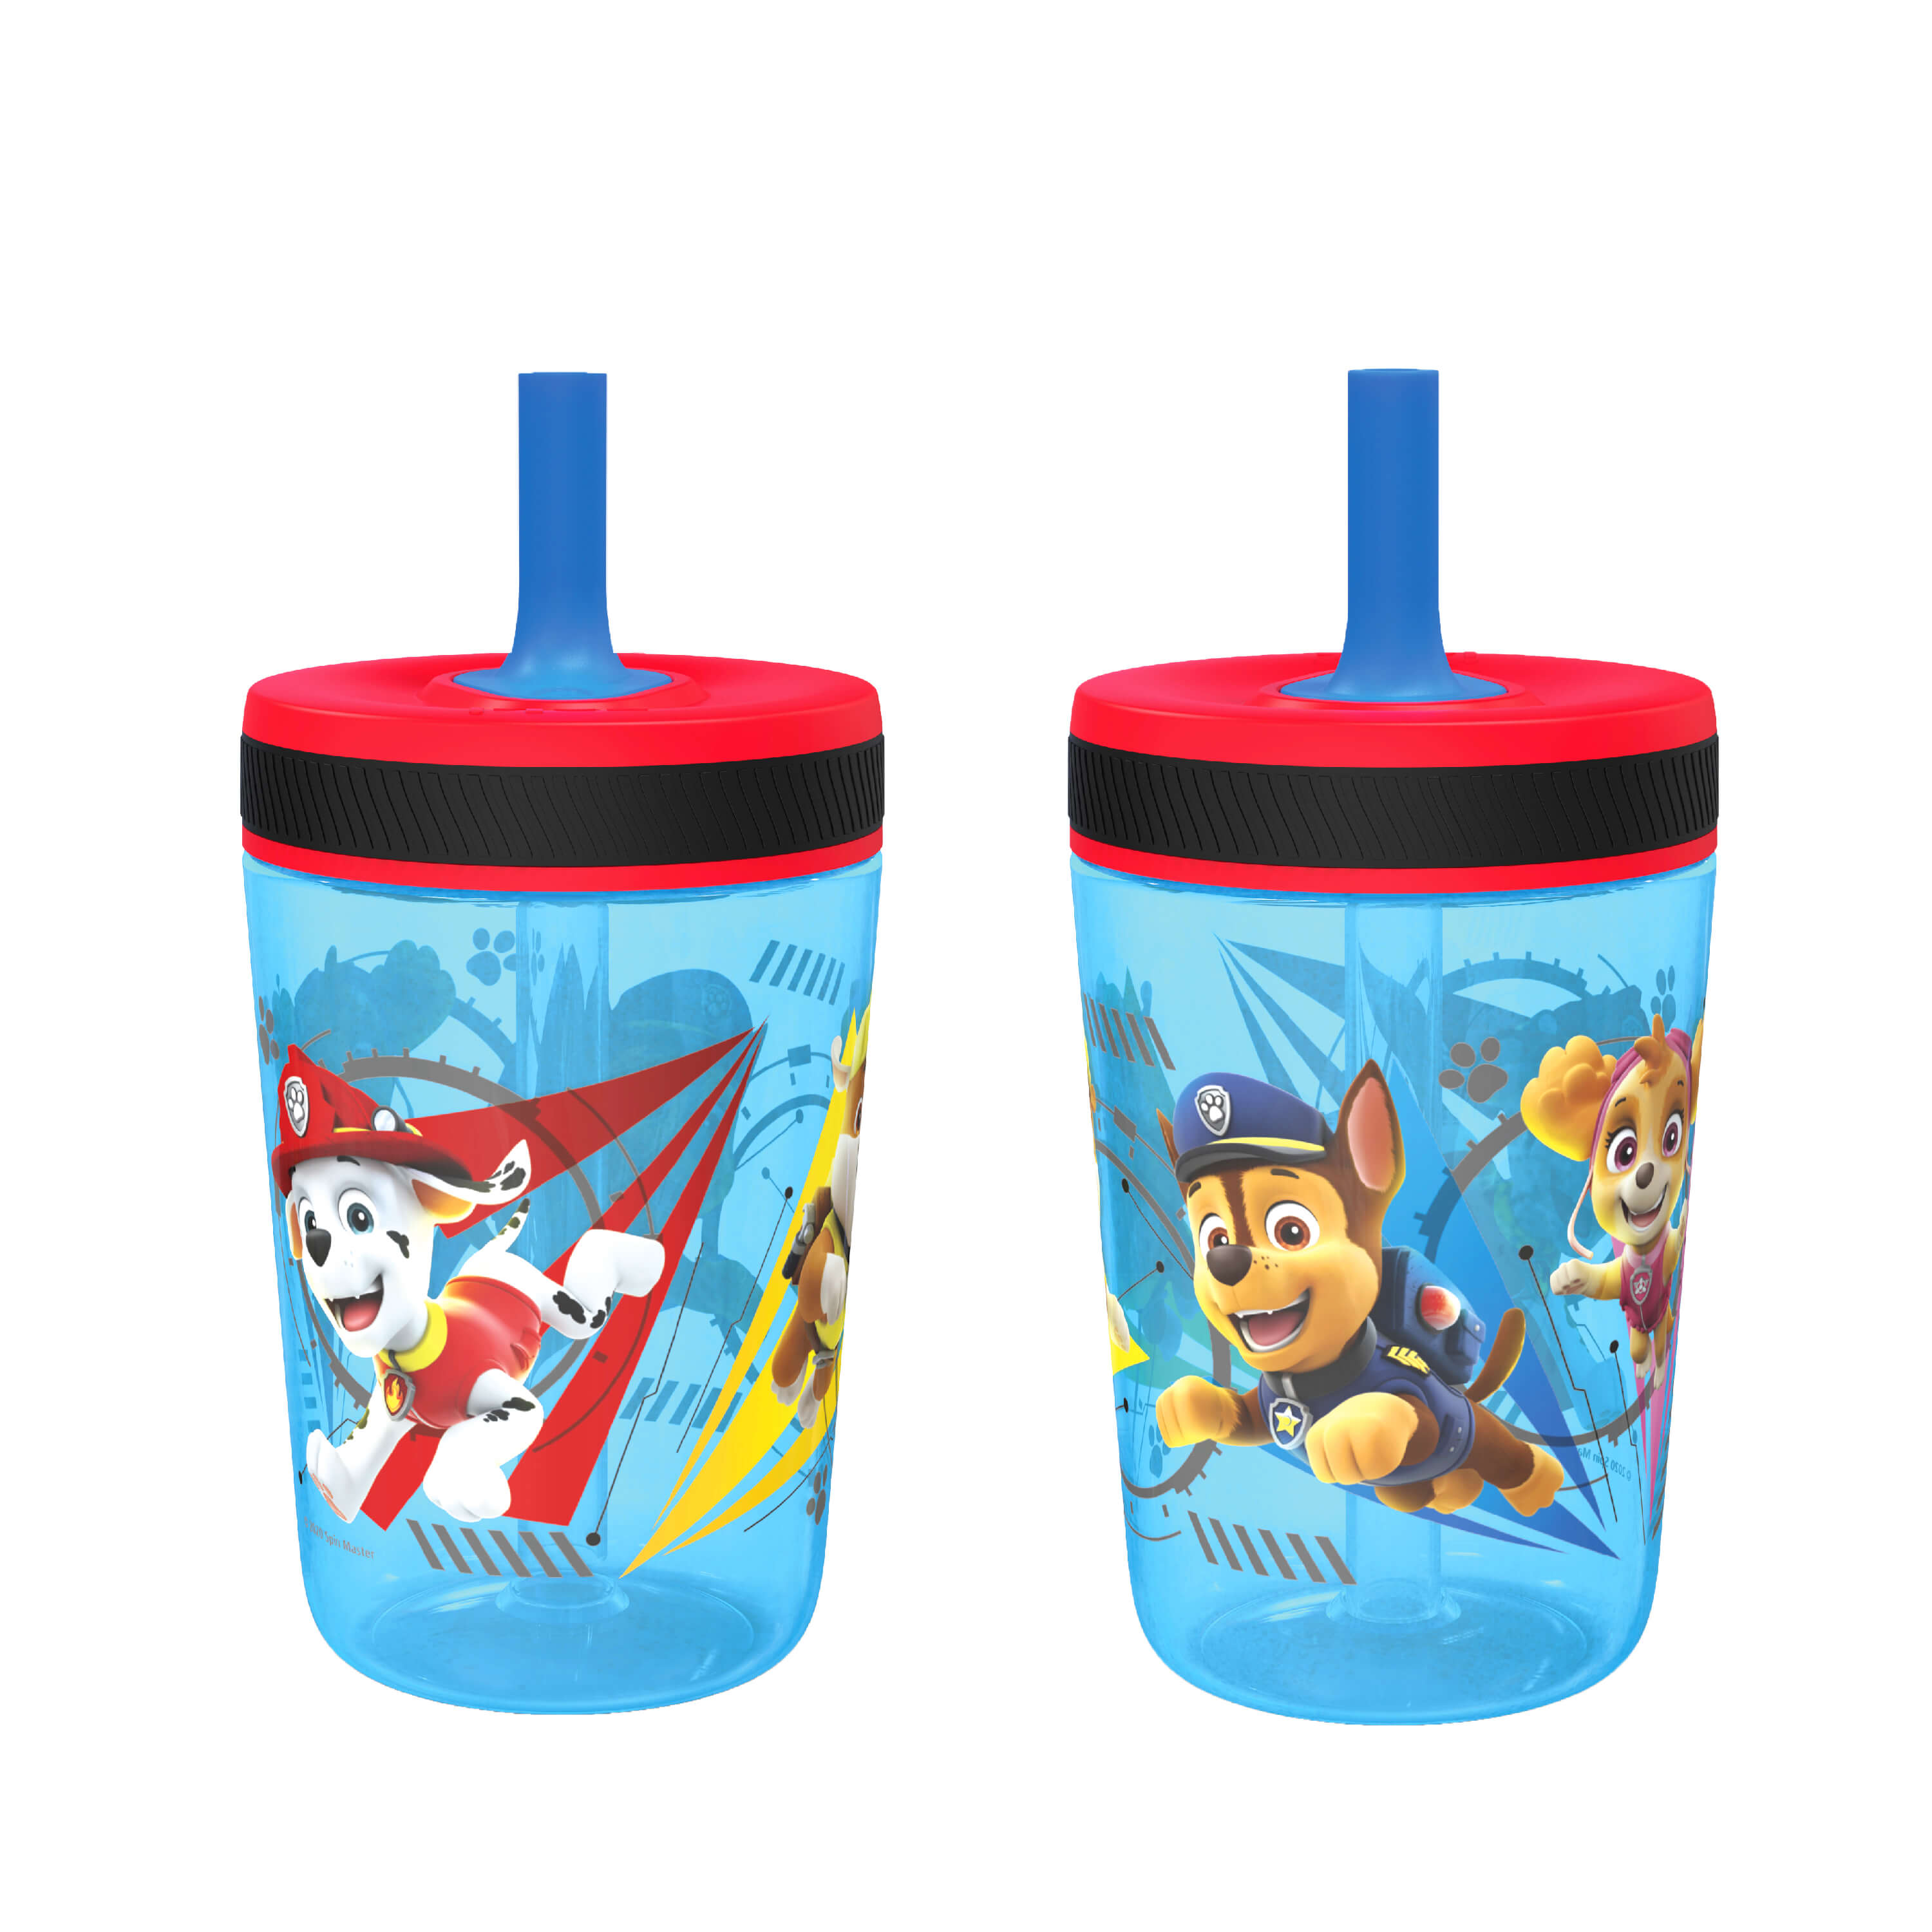 Zak Designs Sonic the Hedgehog Kelso Toddler Cups For Travel or At